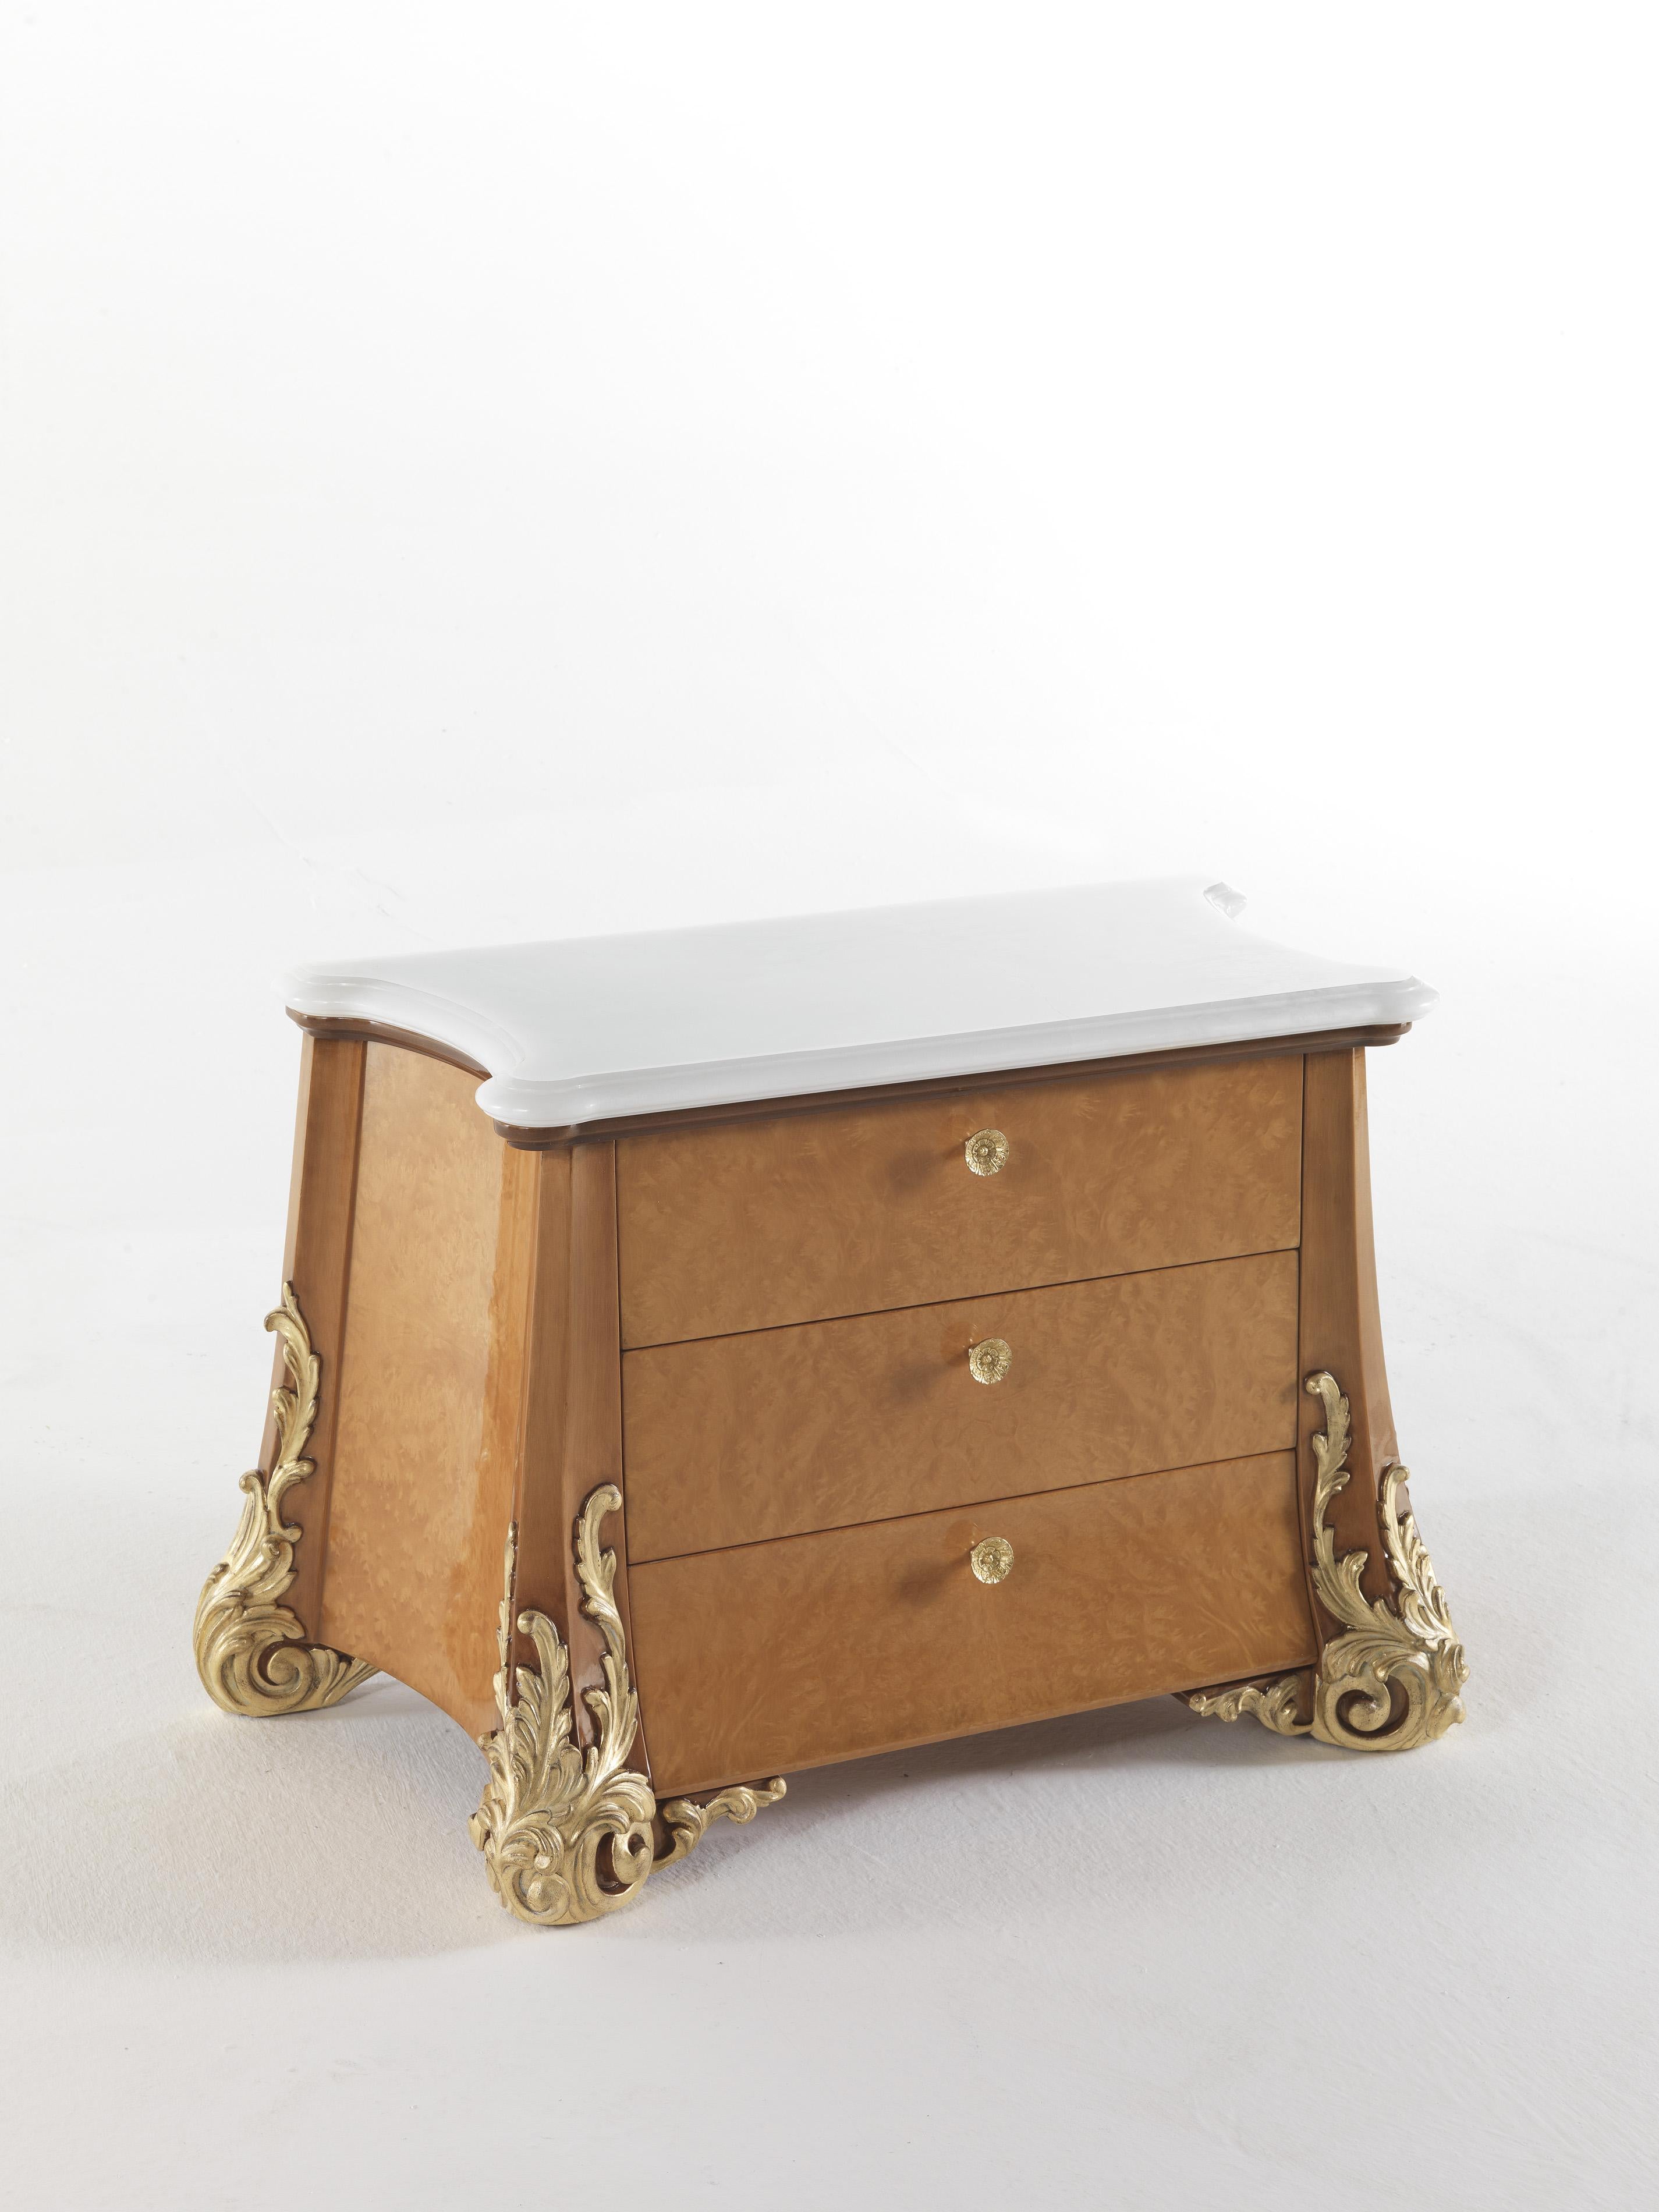 Sophie is a line of furniture with classical and sinuous lines. Featuring a wood structure with a glossy briar finish, the night tables of the line are enriched with hand-carved decorations and gold details that add a touch of timeless beauty to the